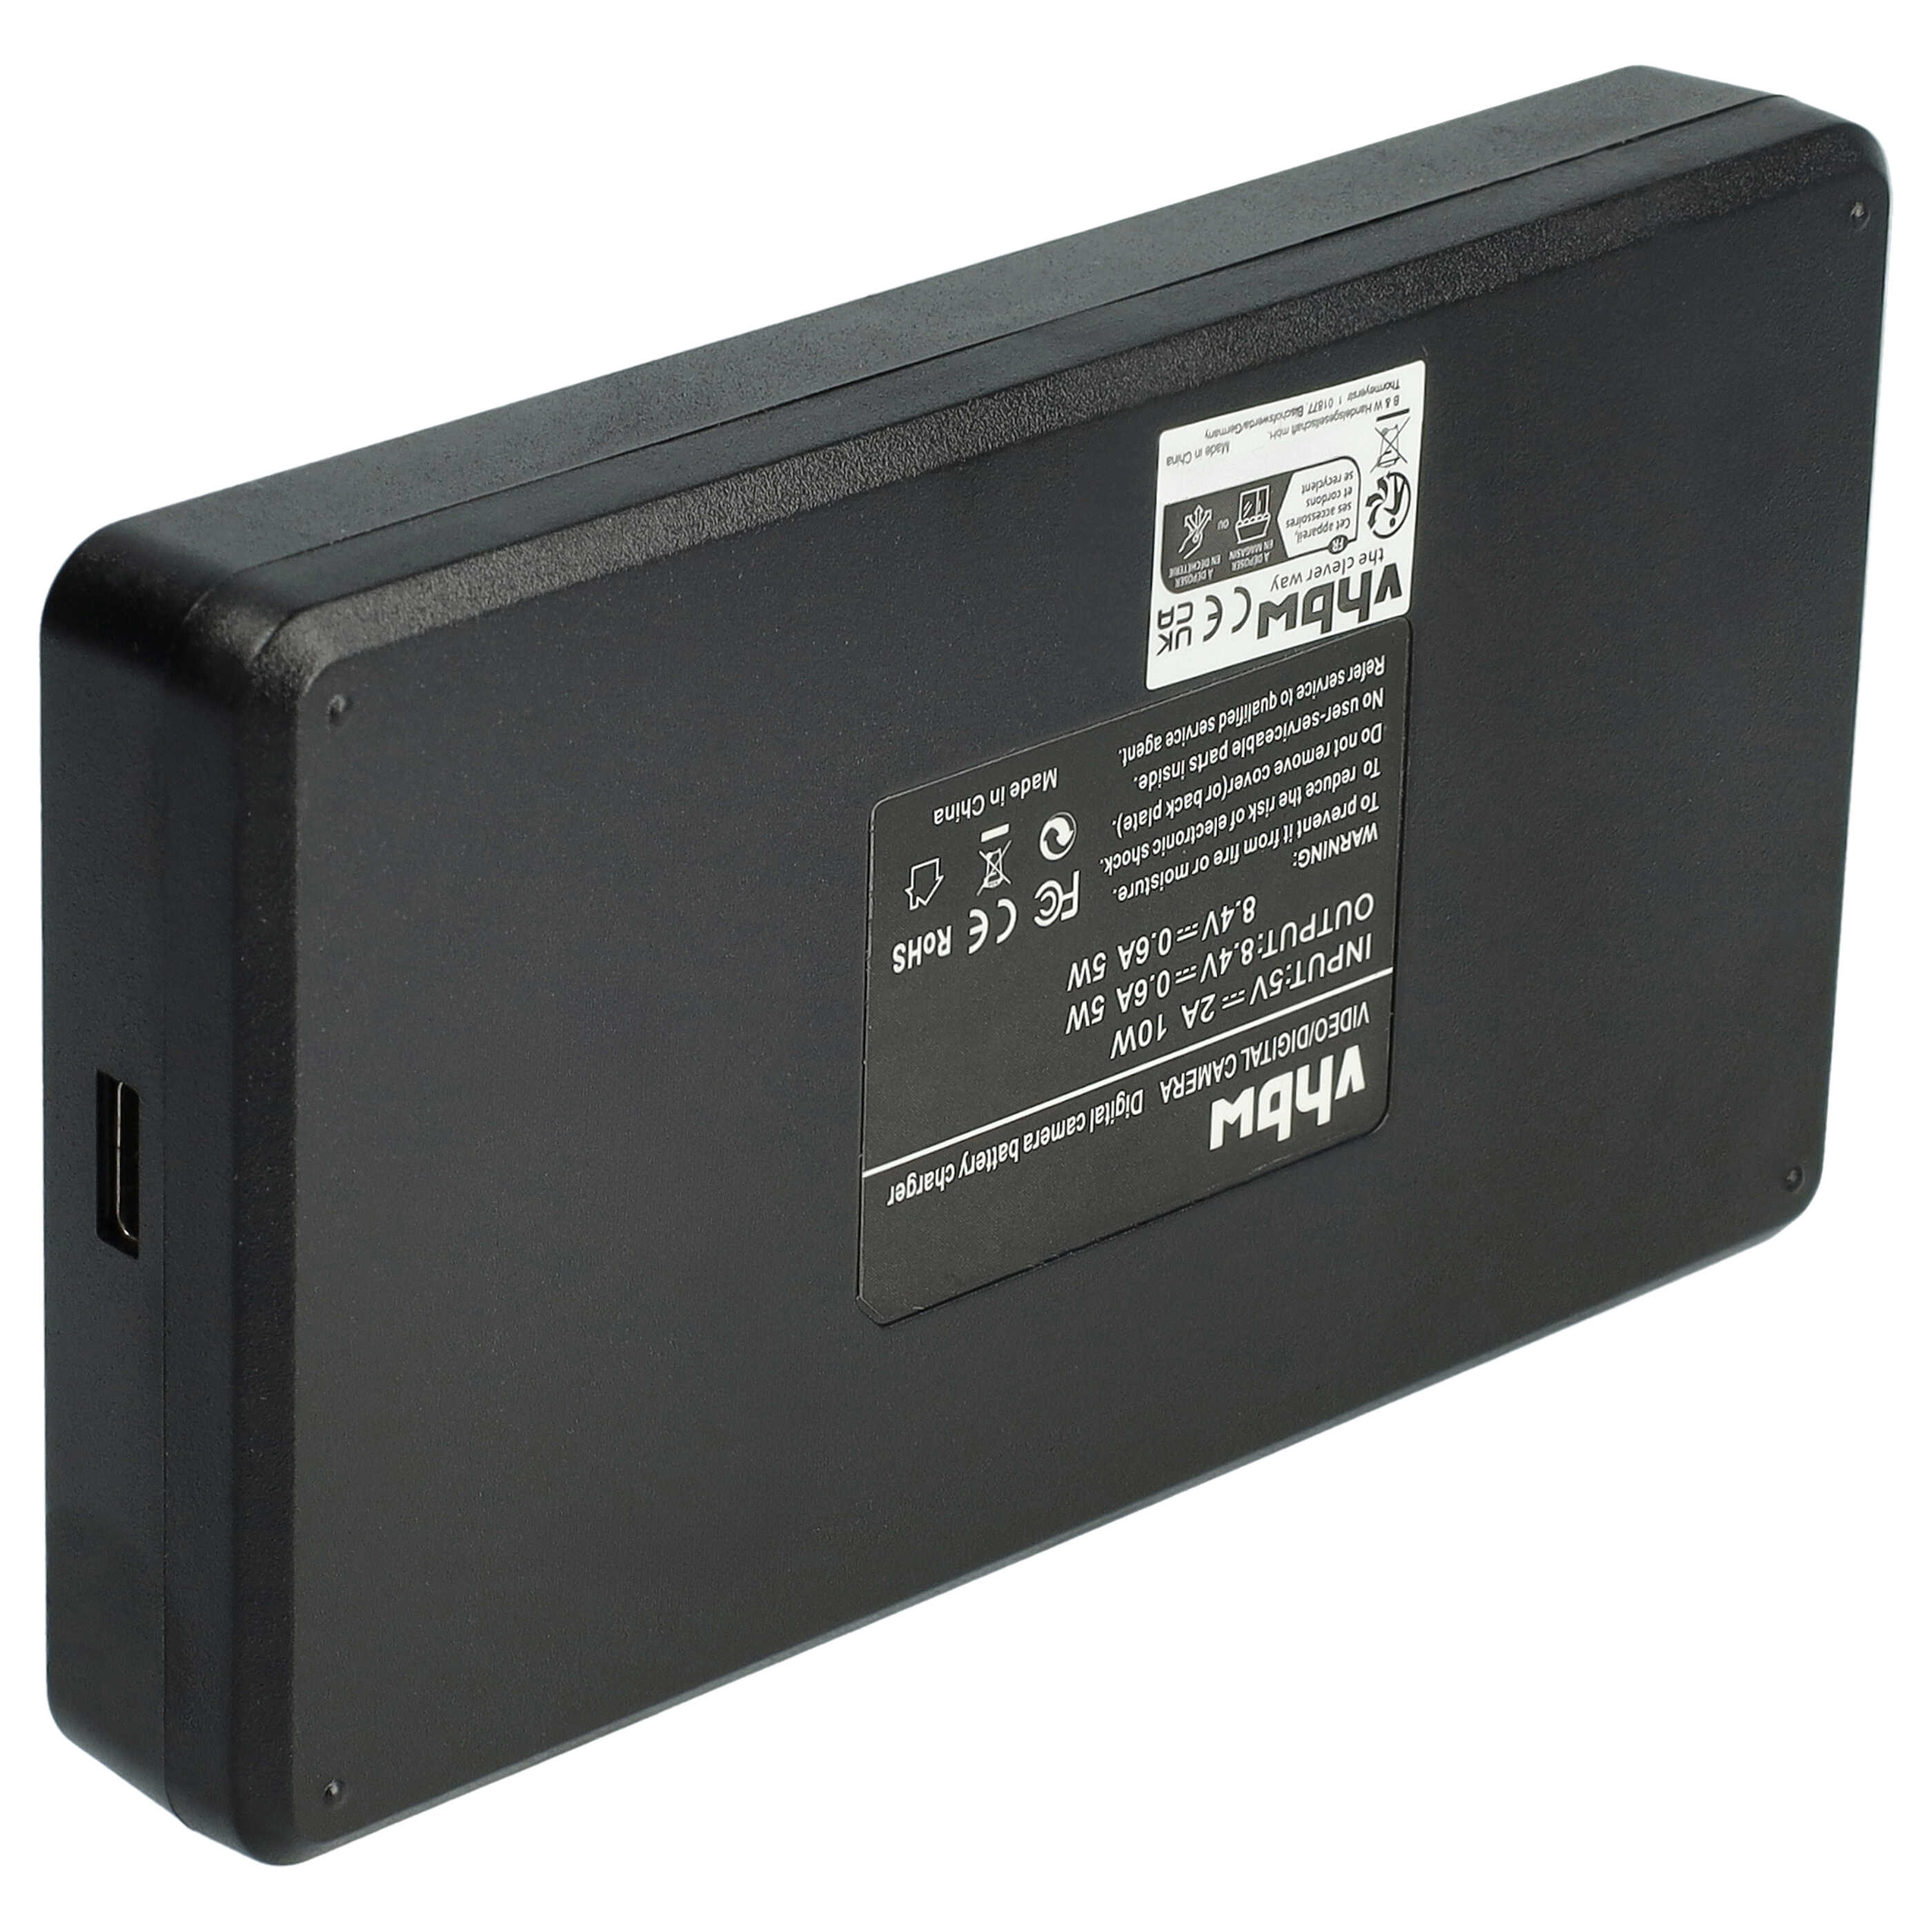 Battery Charger suitable for Pentax Digital Camera - 0.5 A, 8.4 V